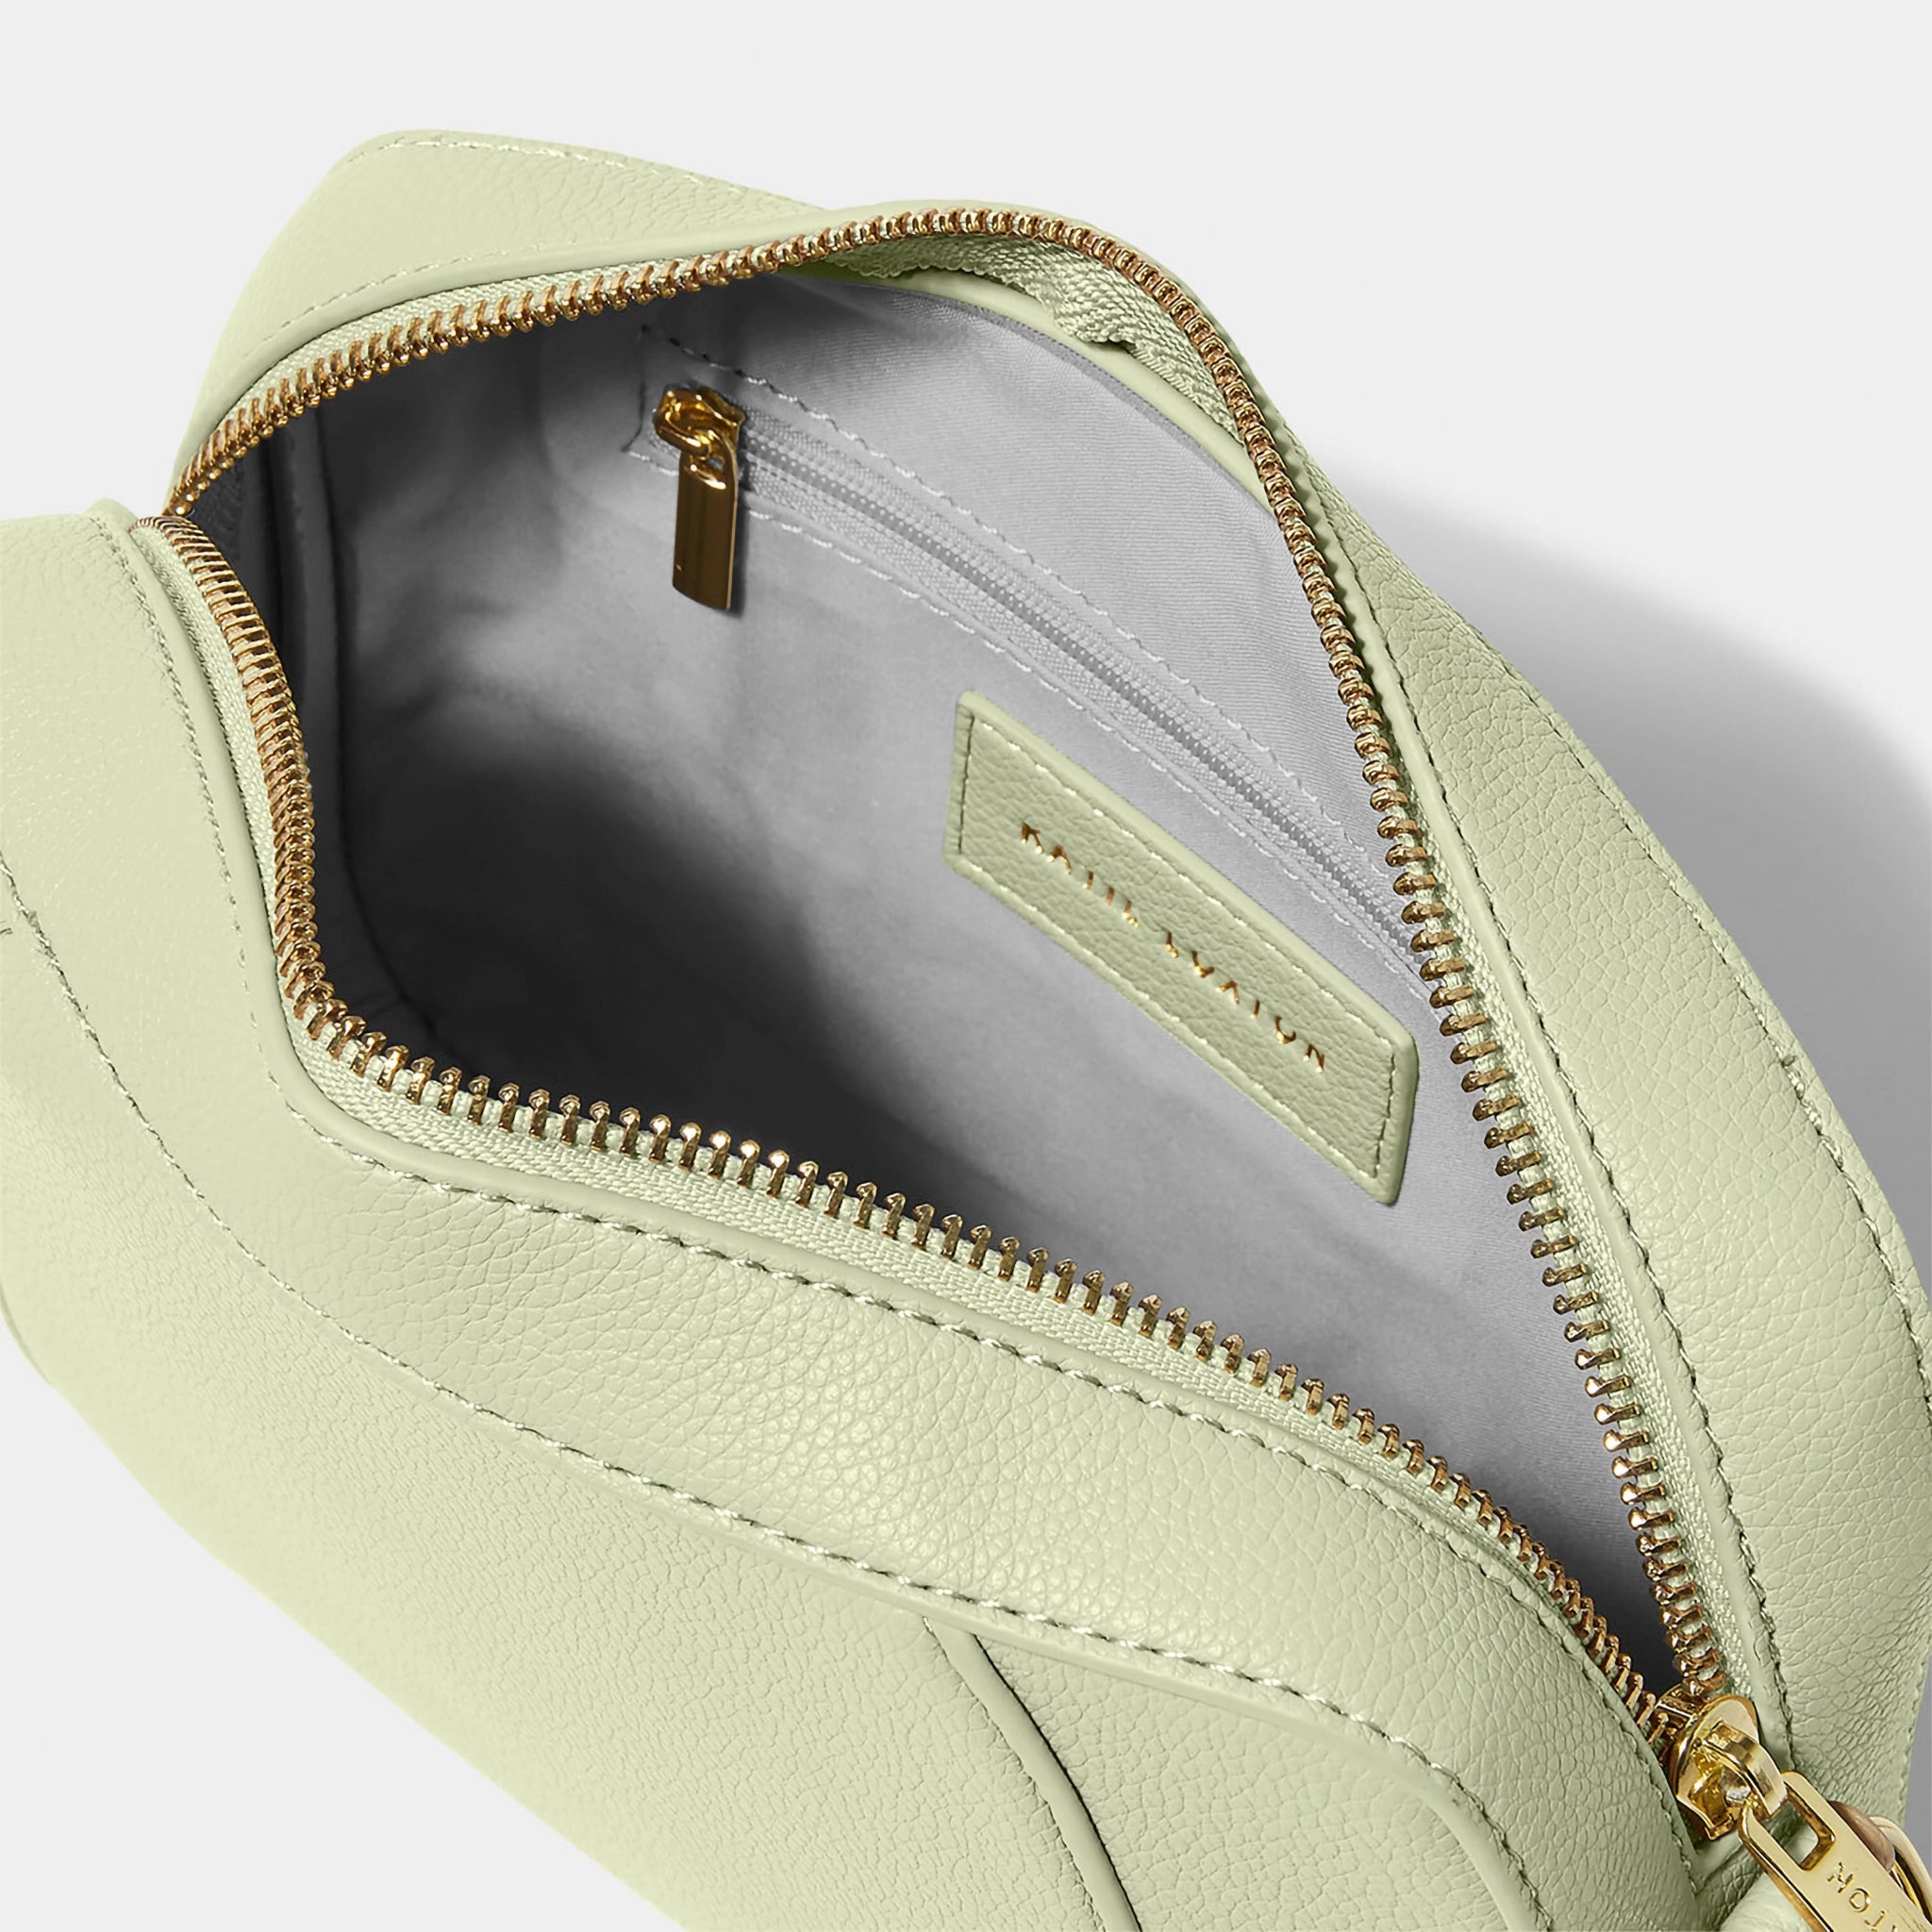 Open soft sage crossbody bag in a simple box shape with adjustable strap and gold hardware